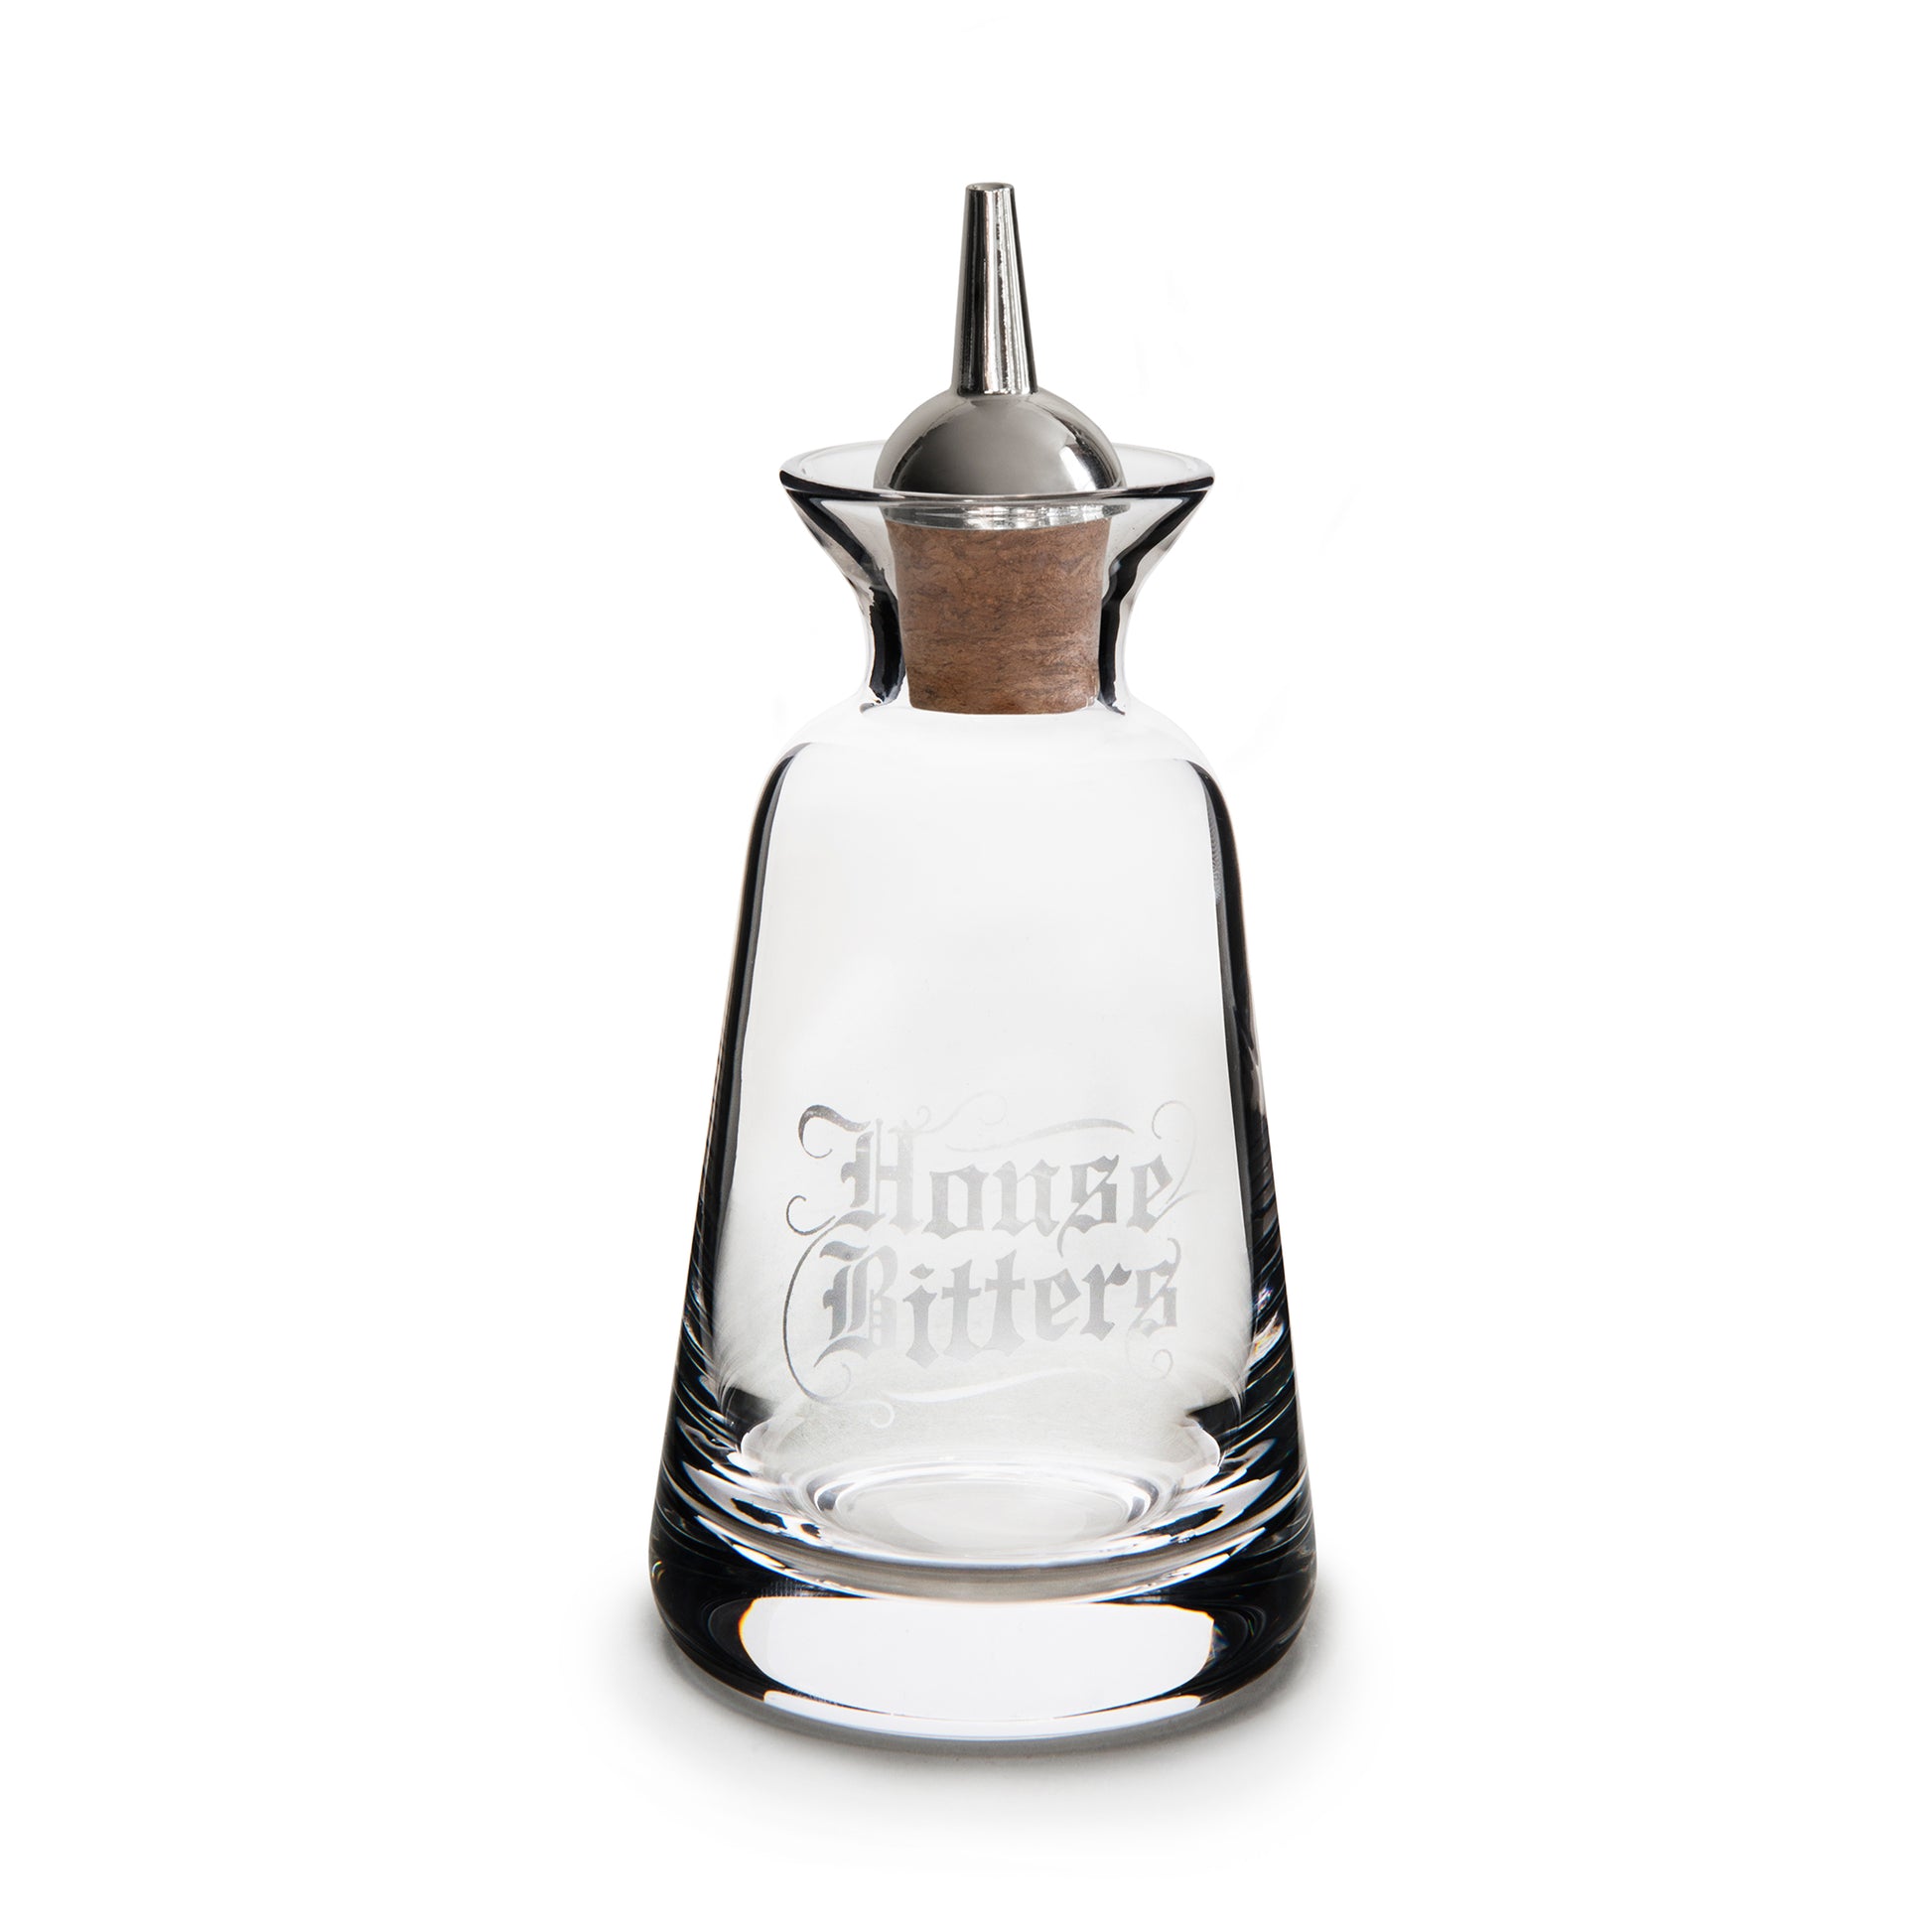 FINEWELL™ BITTERS BOTTLE GOTHIC STYLE HOUSE BITTERS – SILVER-PLATED DASHER TOP / 3oz (90ml)